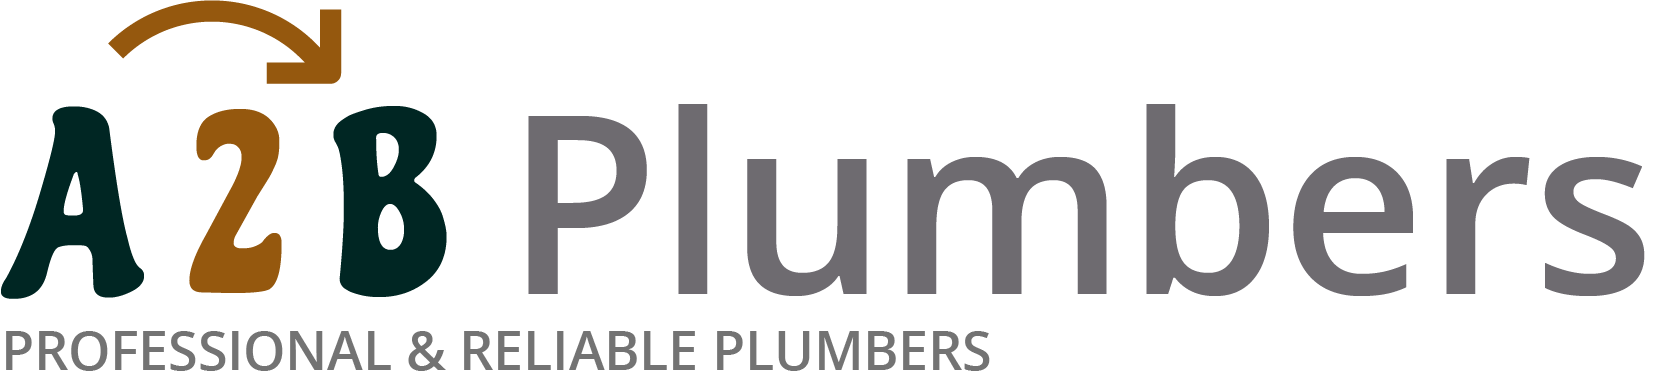 If you need a boiler installed, a radiator repaired or a leaking tap fixed, call us now - we provide services for properties in Dunstable and the local area.